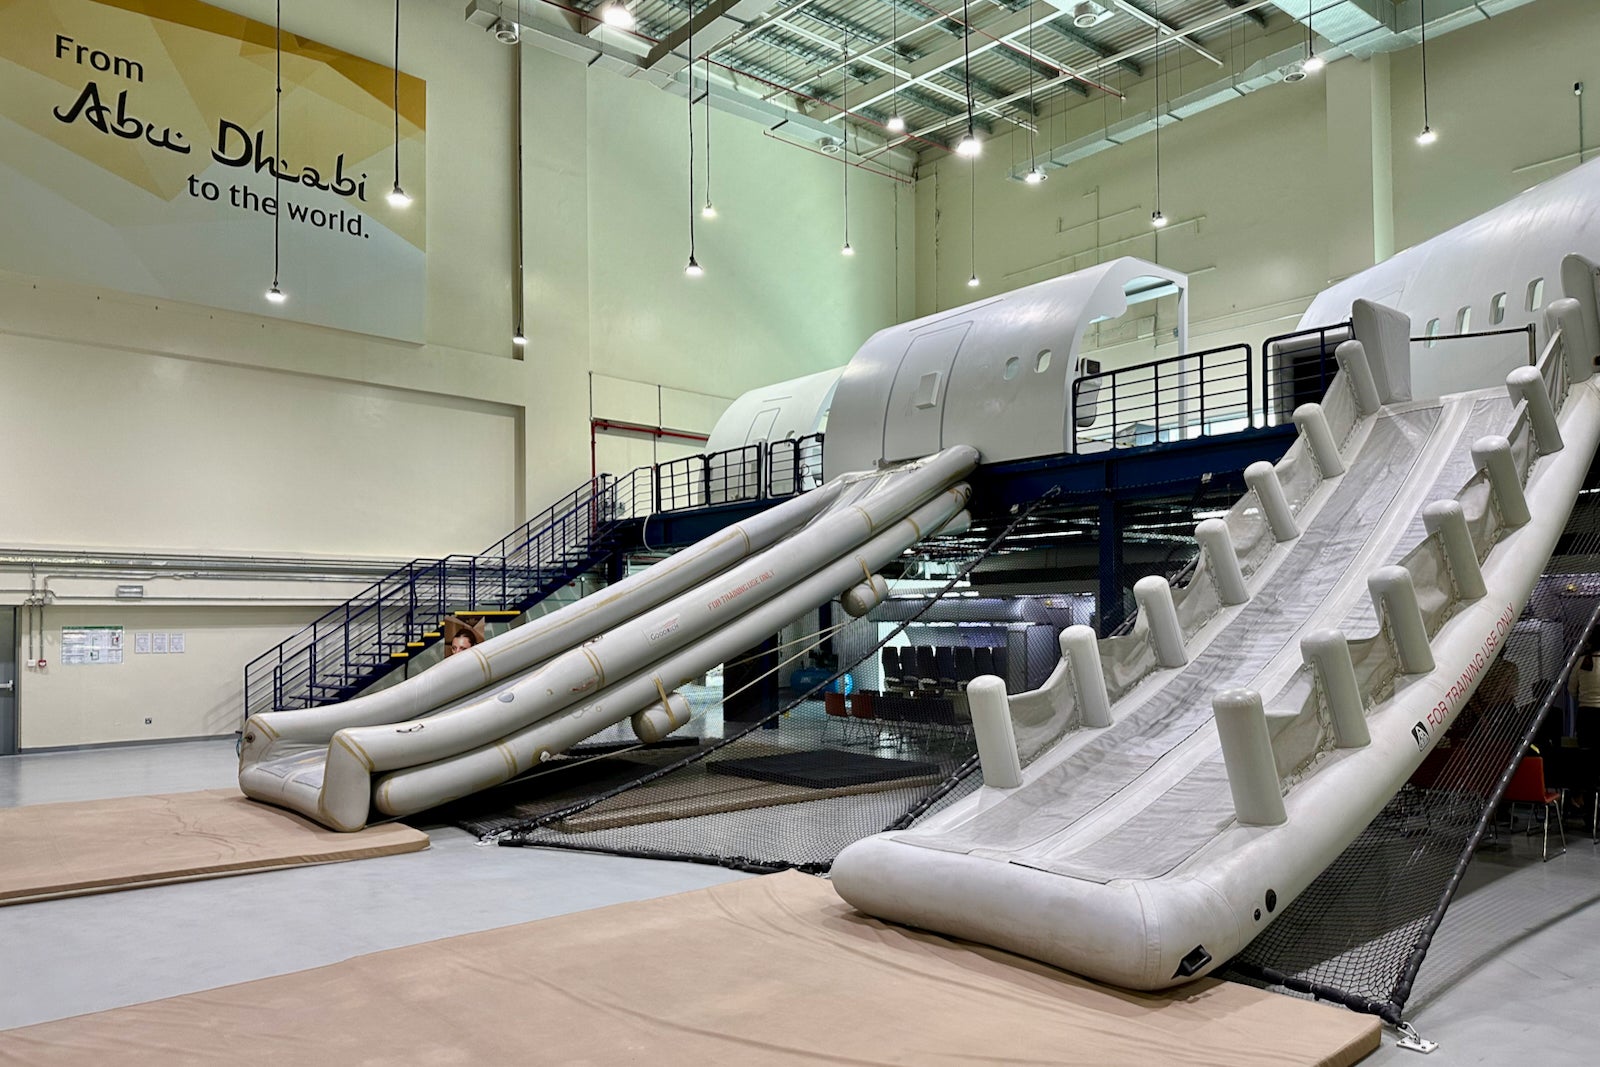 Inflatable exit stairs at Etihad flight attendant training center